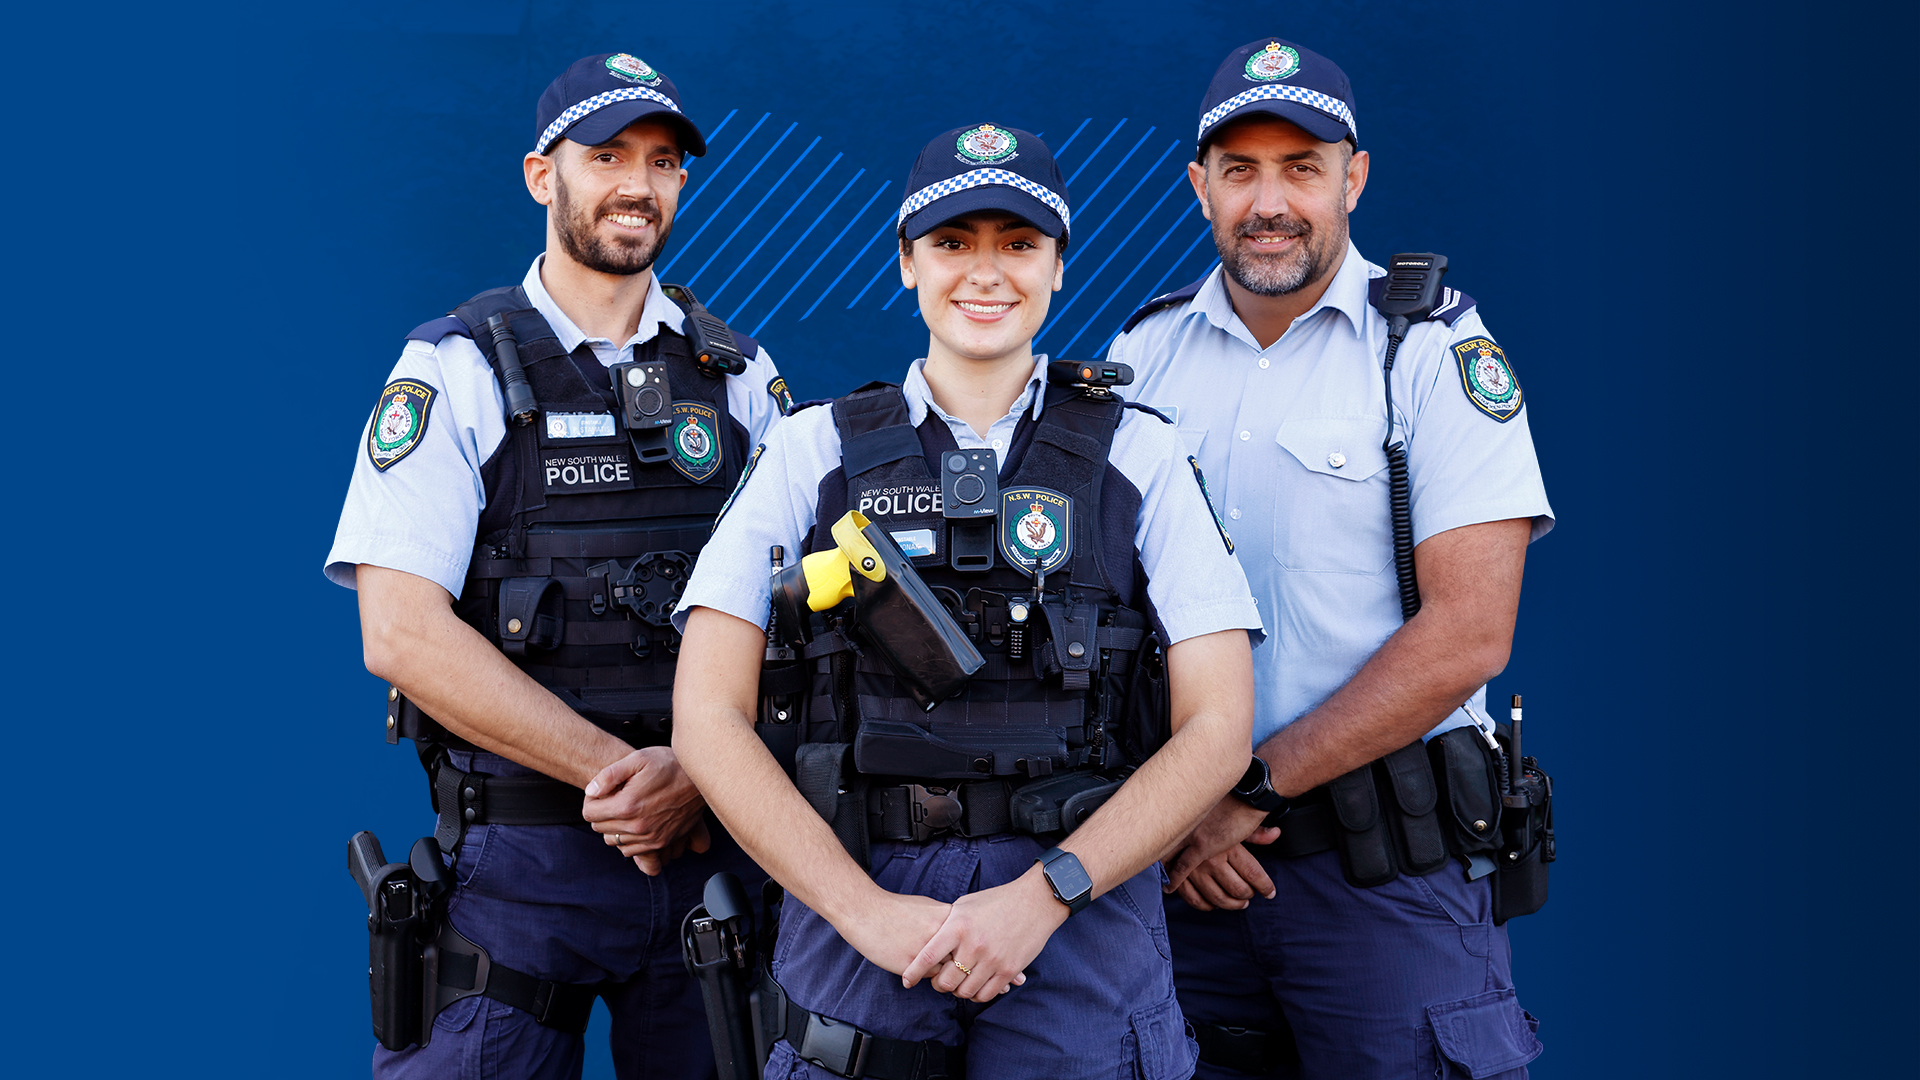 Nsw Water Police Wallpapers